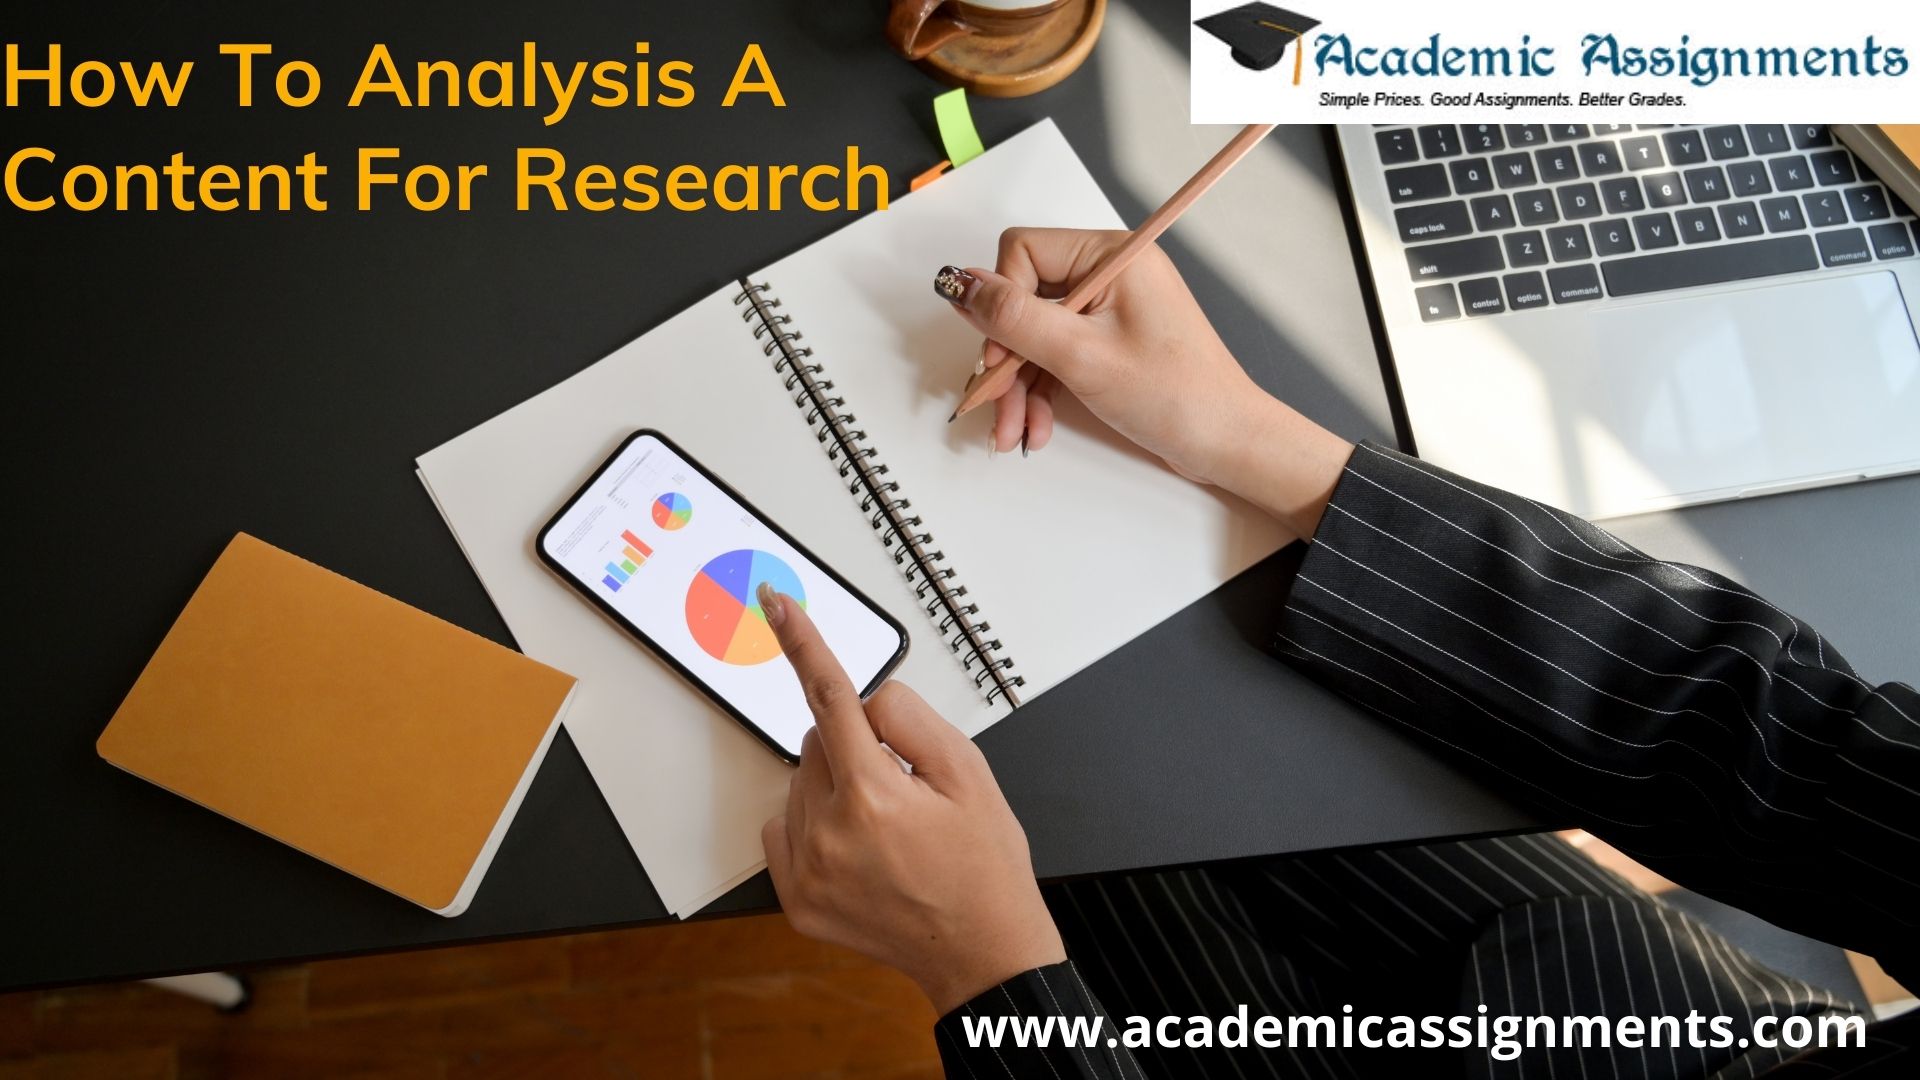 How To Analysis A Content For Research